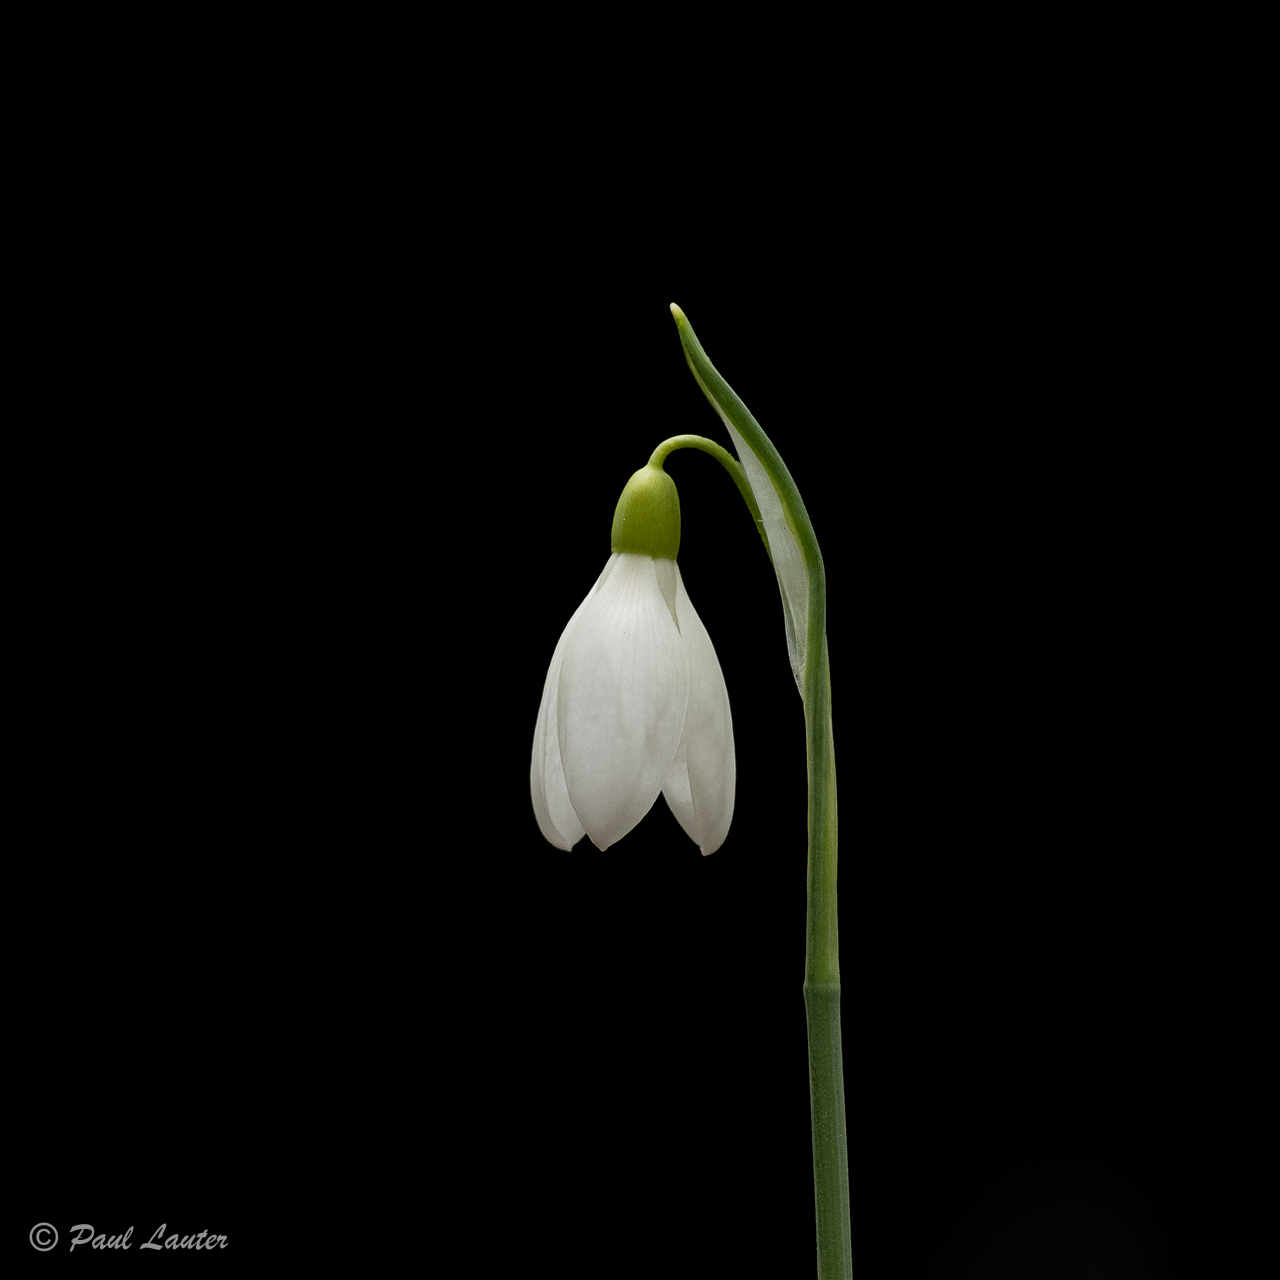 The humble Snowdrop